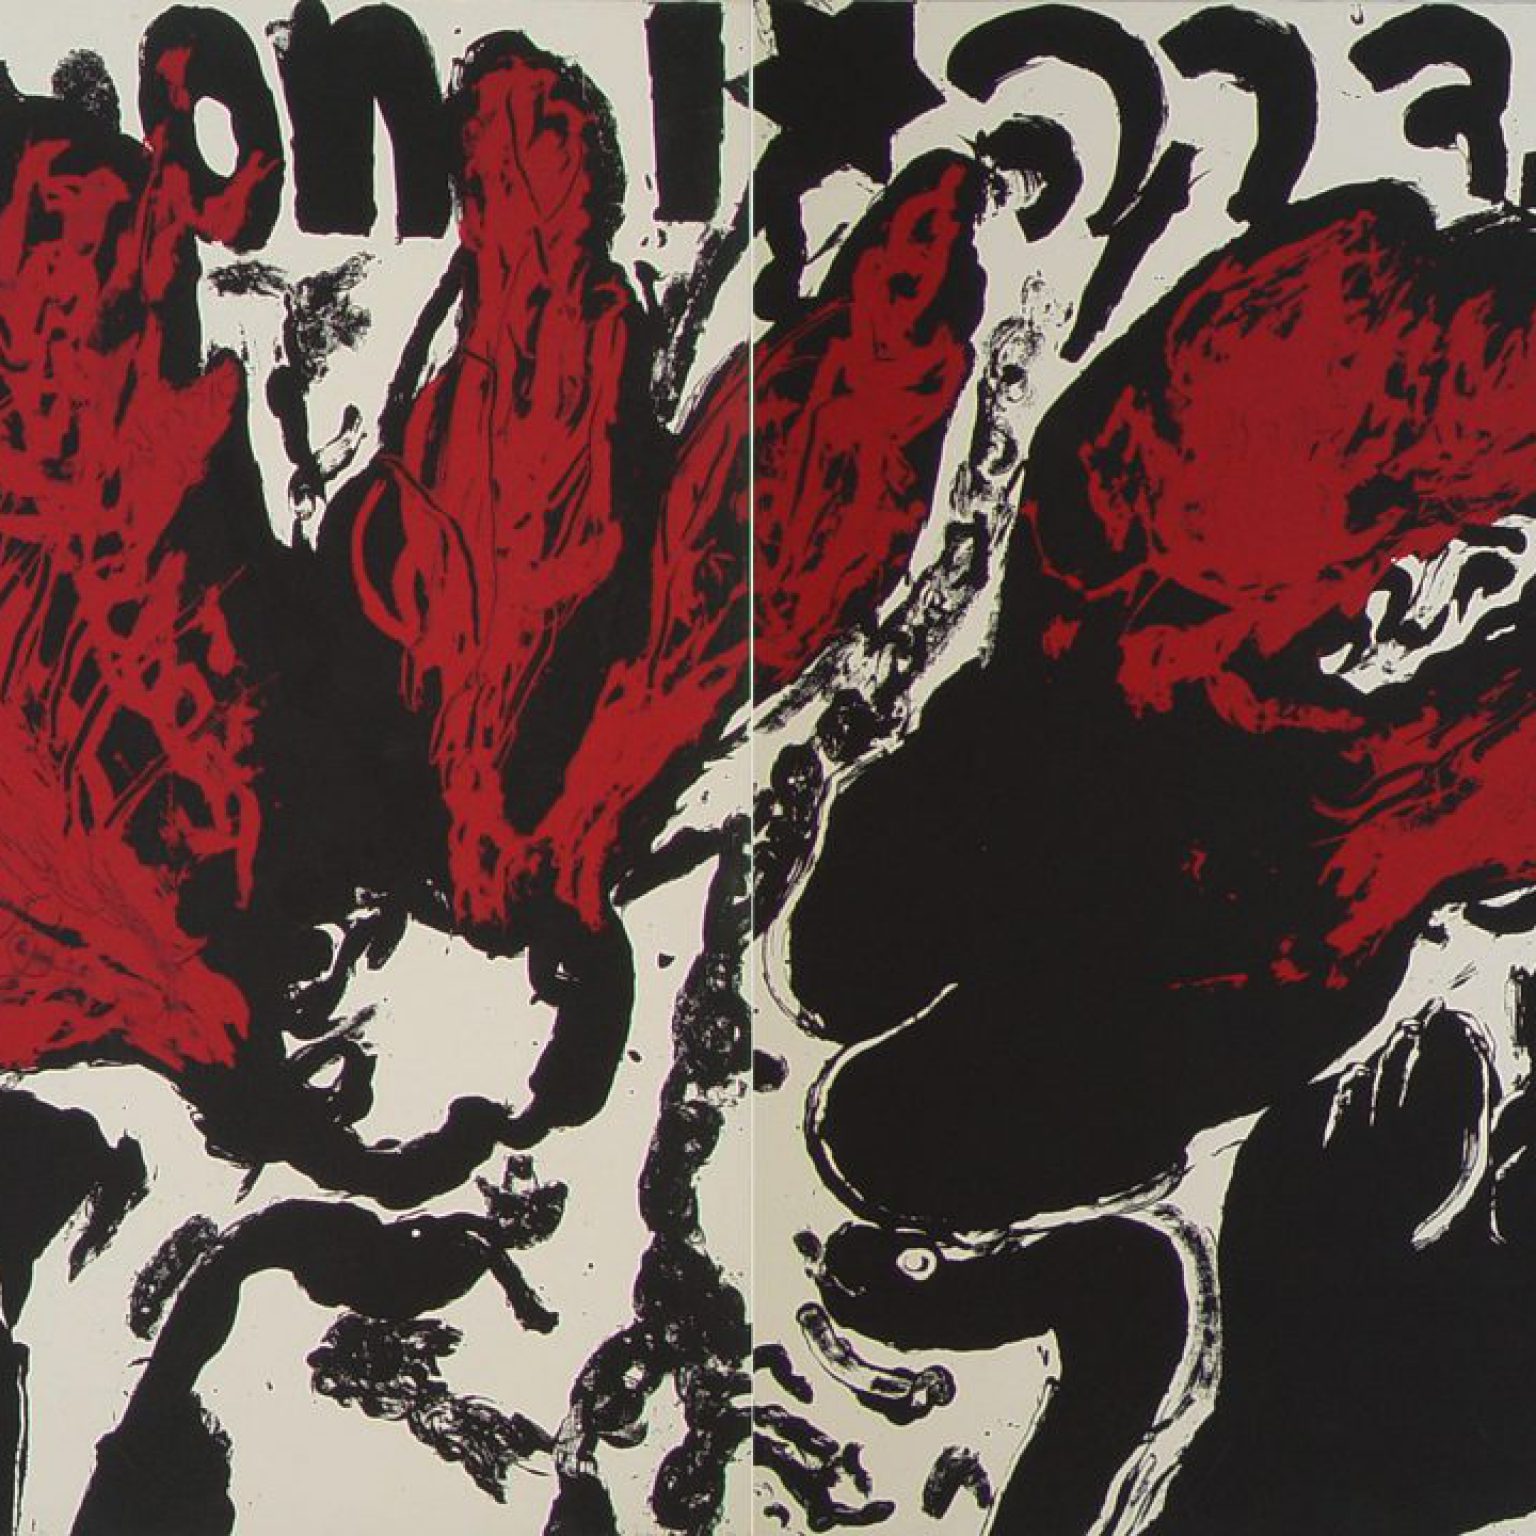 Kindness and Charity (1984), screenprint, 80 x 120 cm, edition: 24